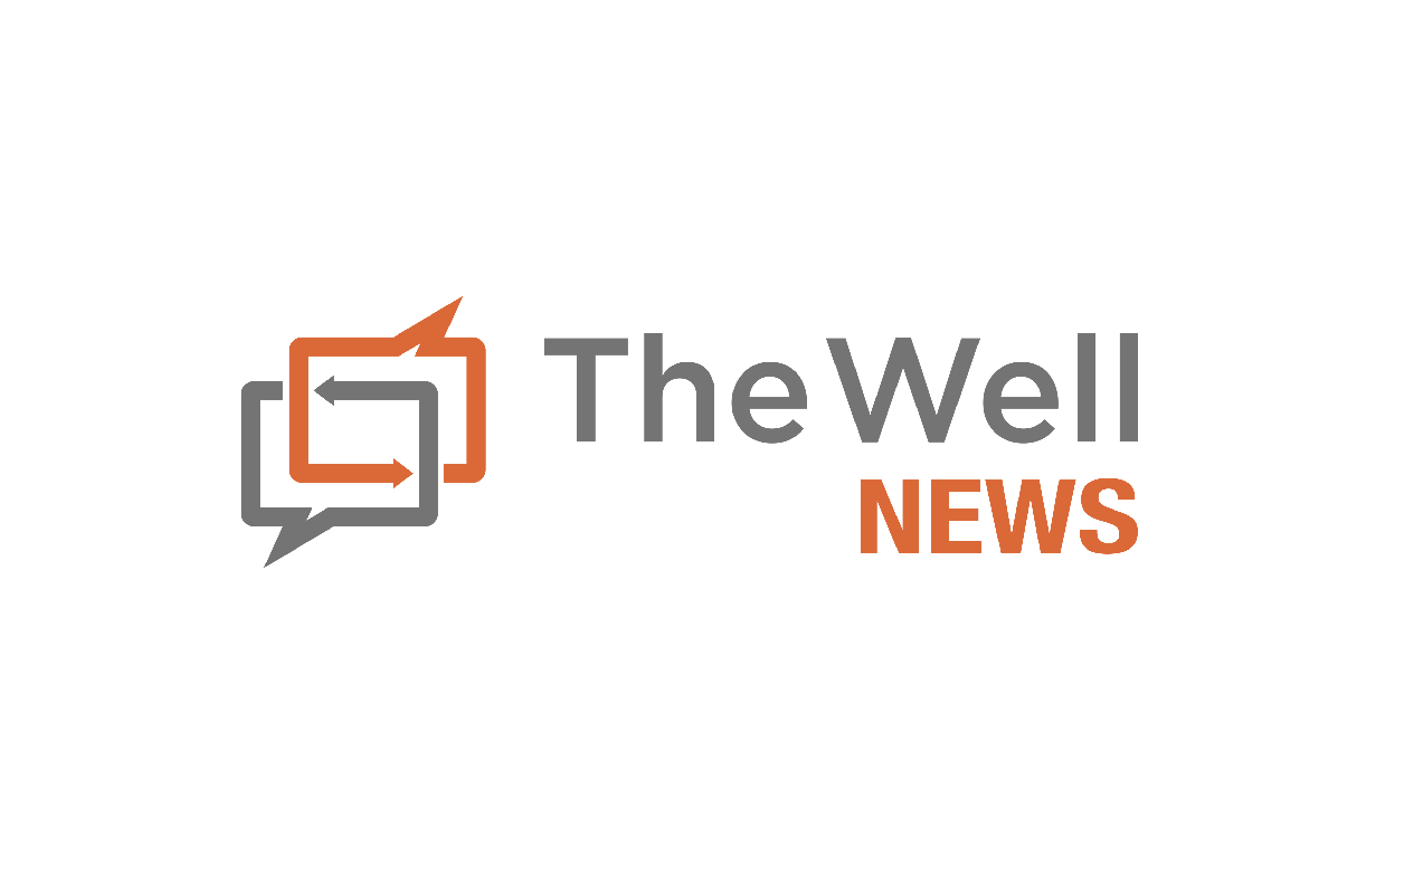 The Well News